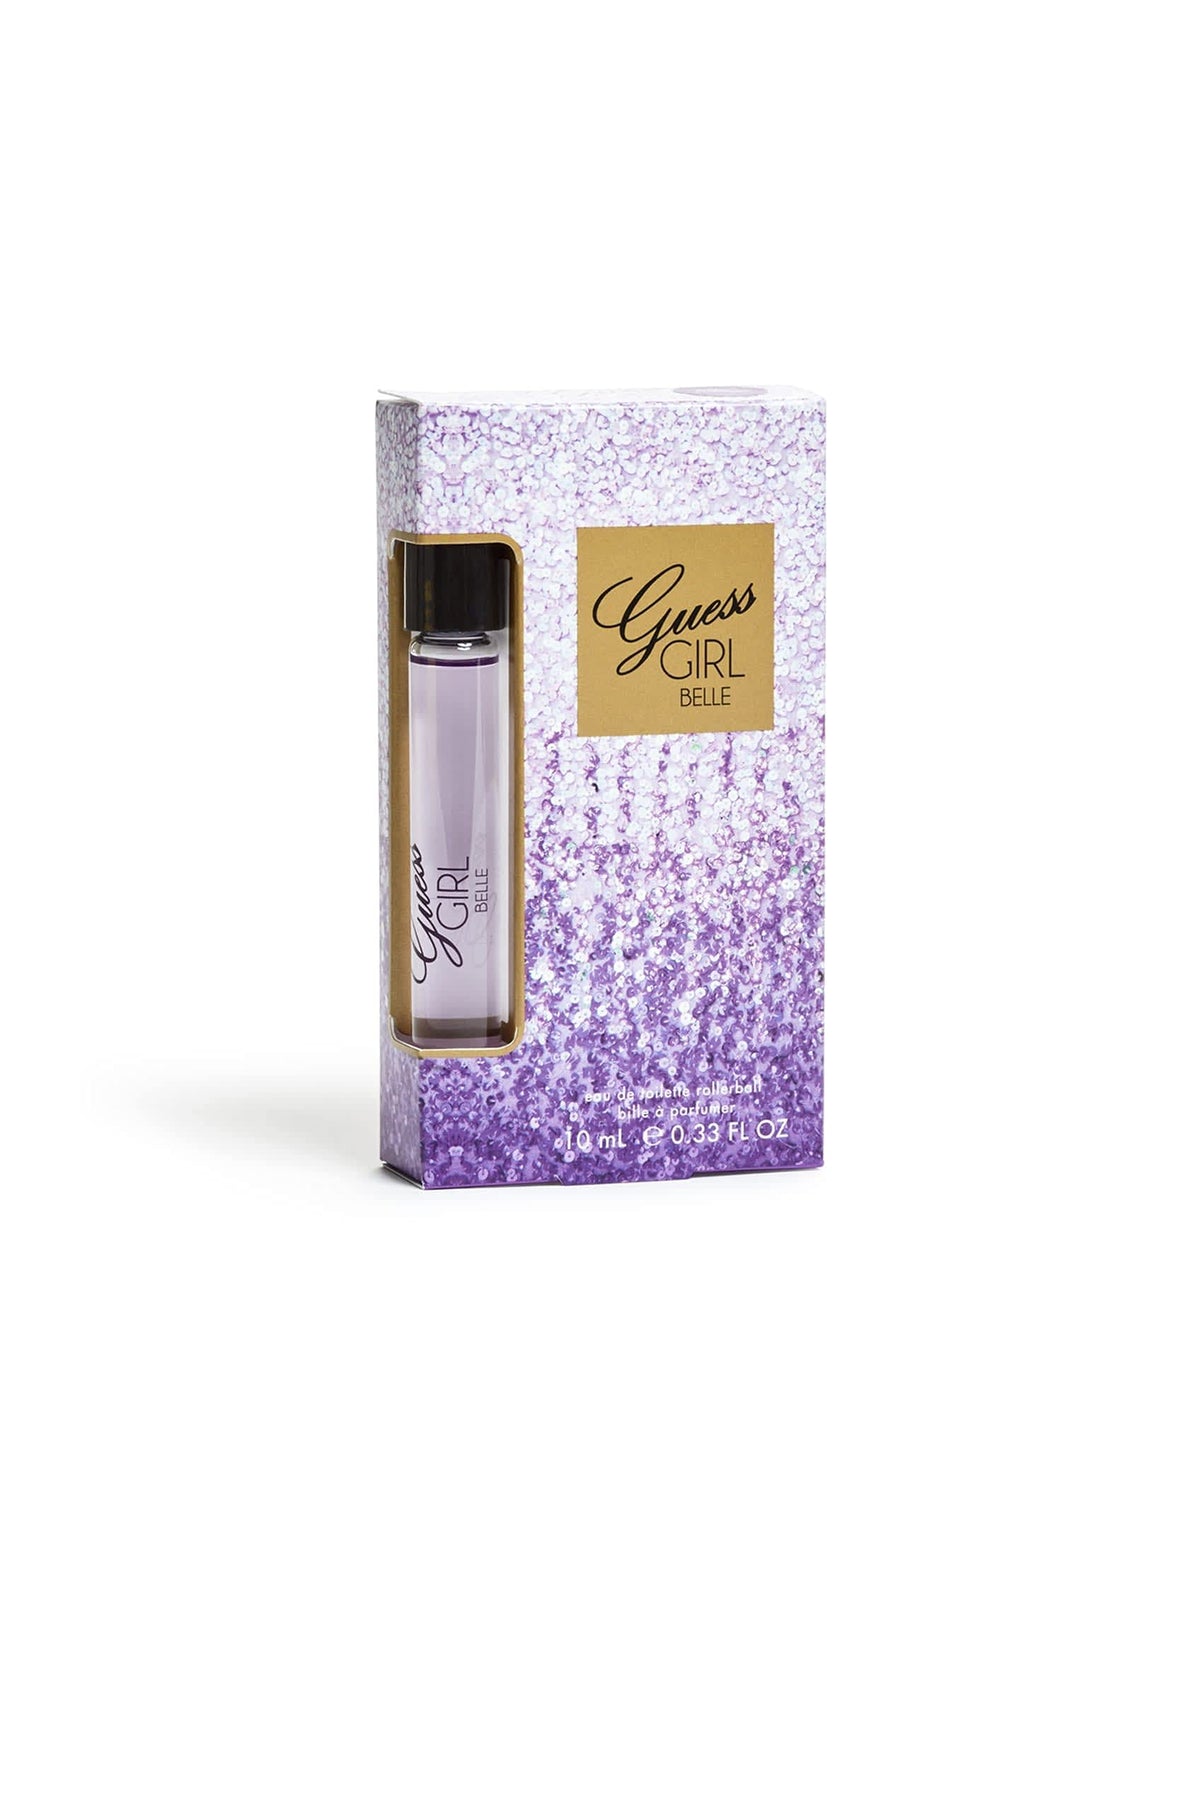 GUESS Factory Girl Belle Rollerball Fragrance